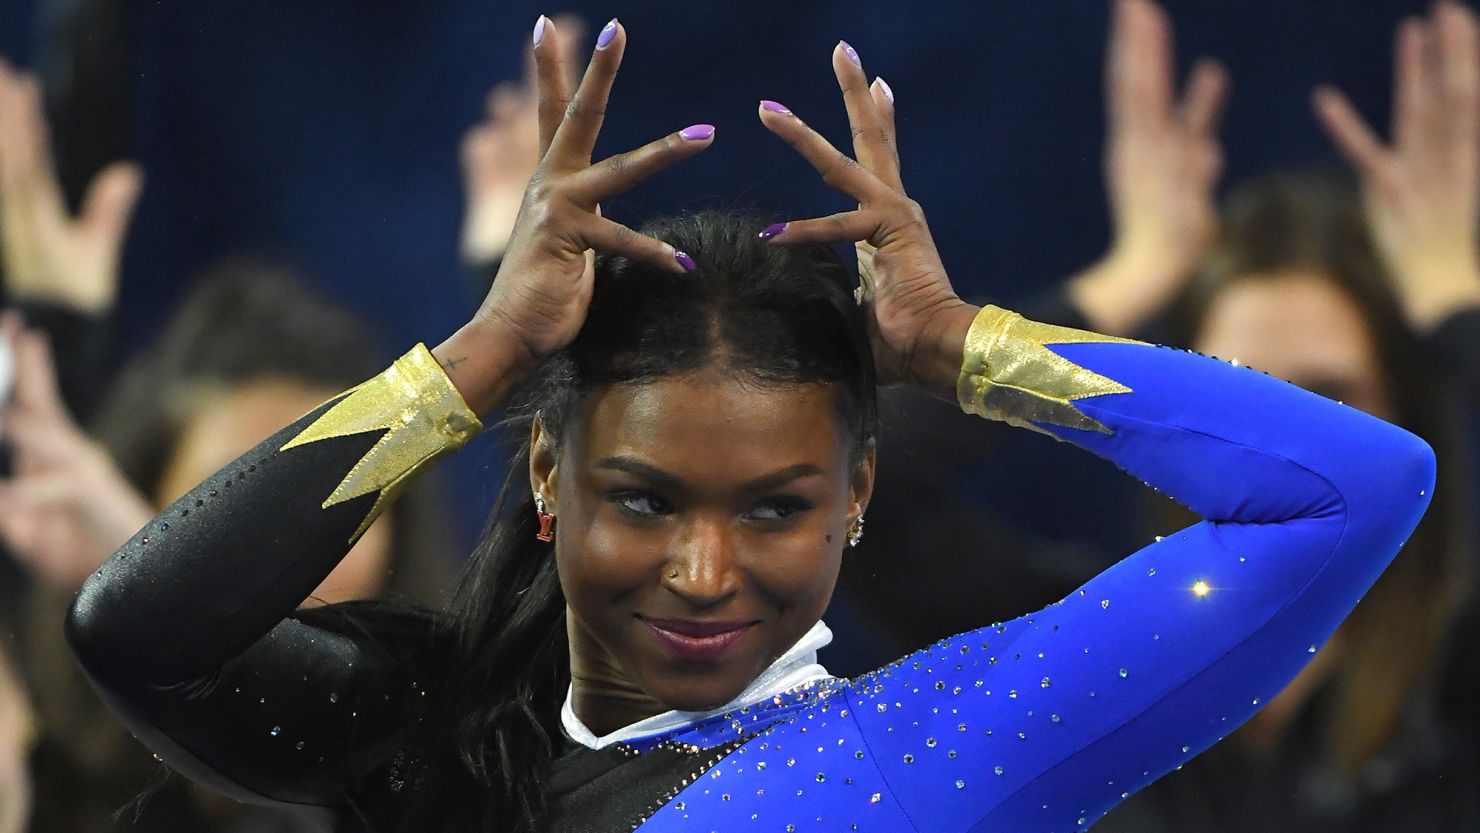 Nia Dennis performs the floor exercise during UCLA Gymnastics Meet the Bruins intra squad event at Pauley Pavilion on December 14, 2019, in Los Angeles, California.